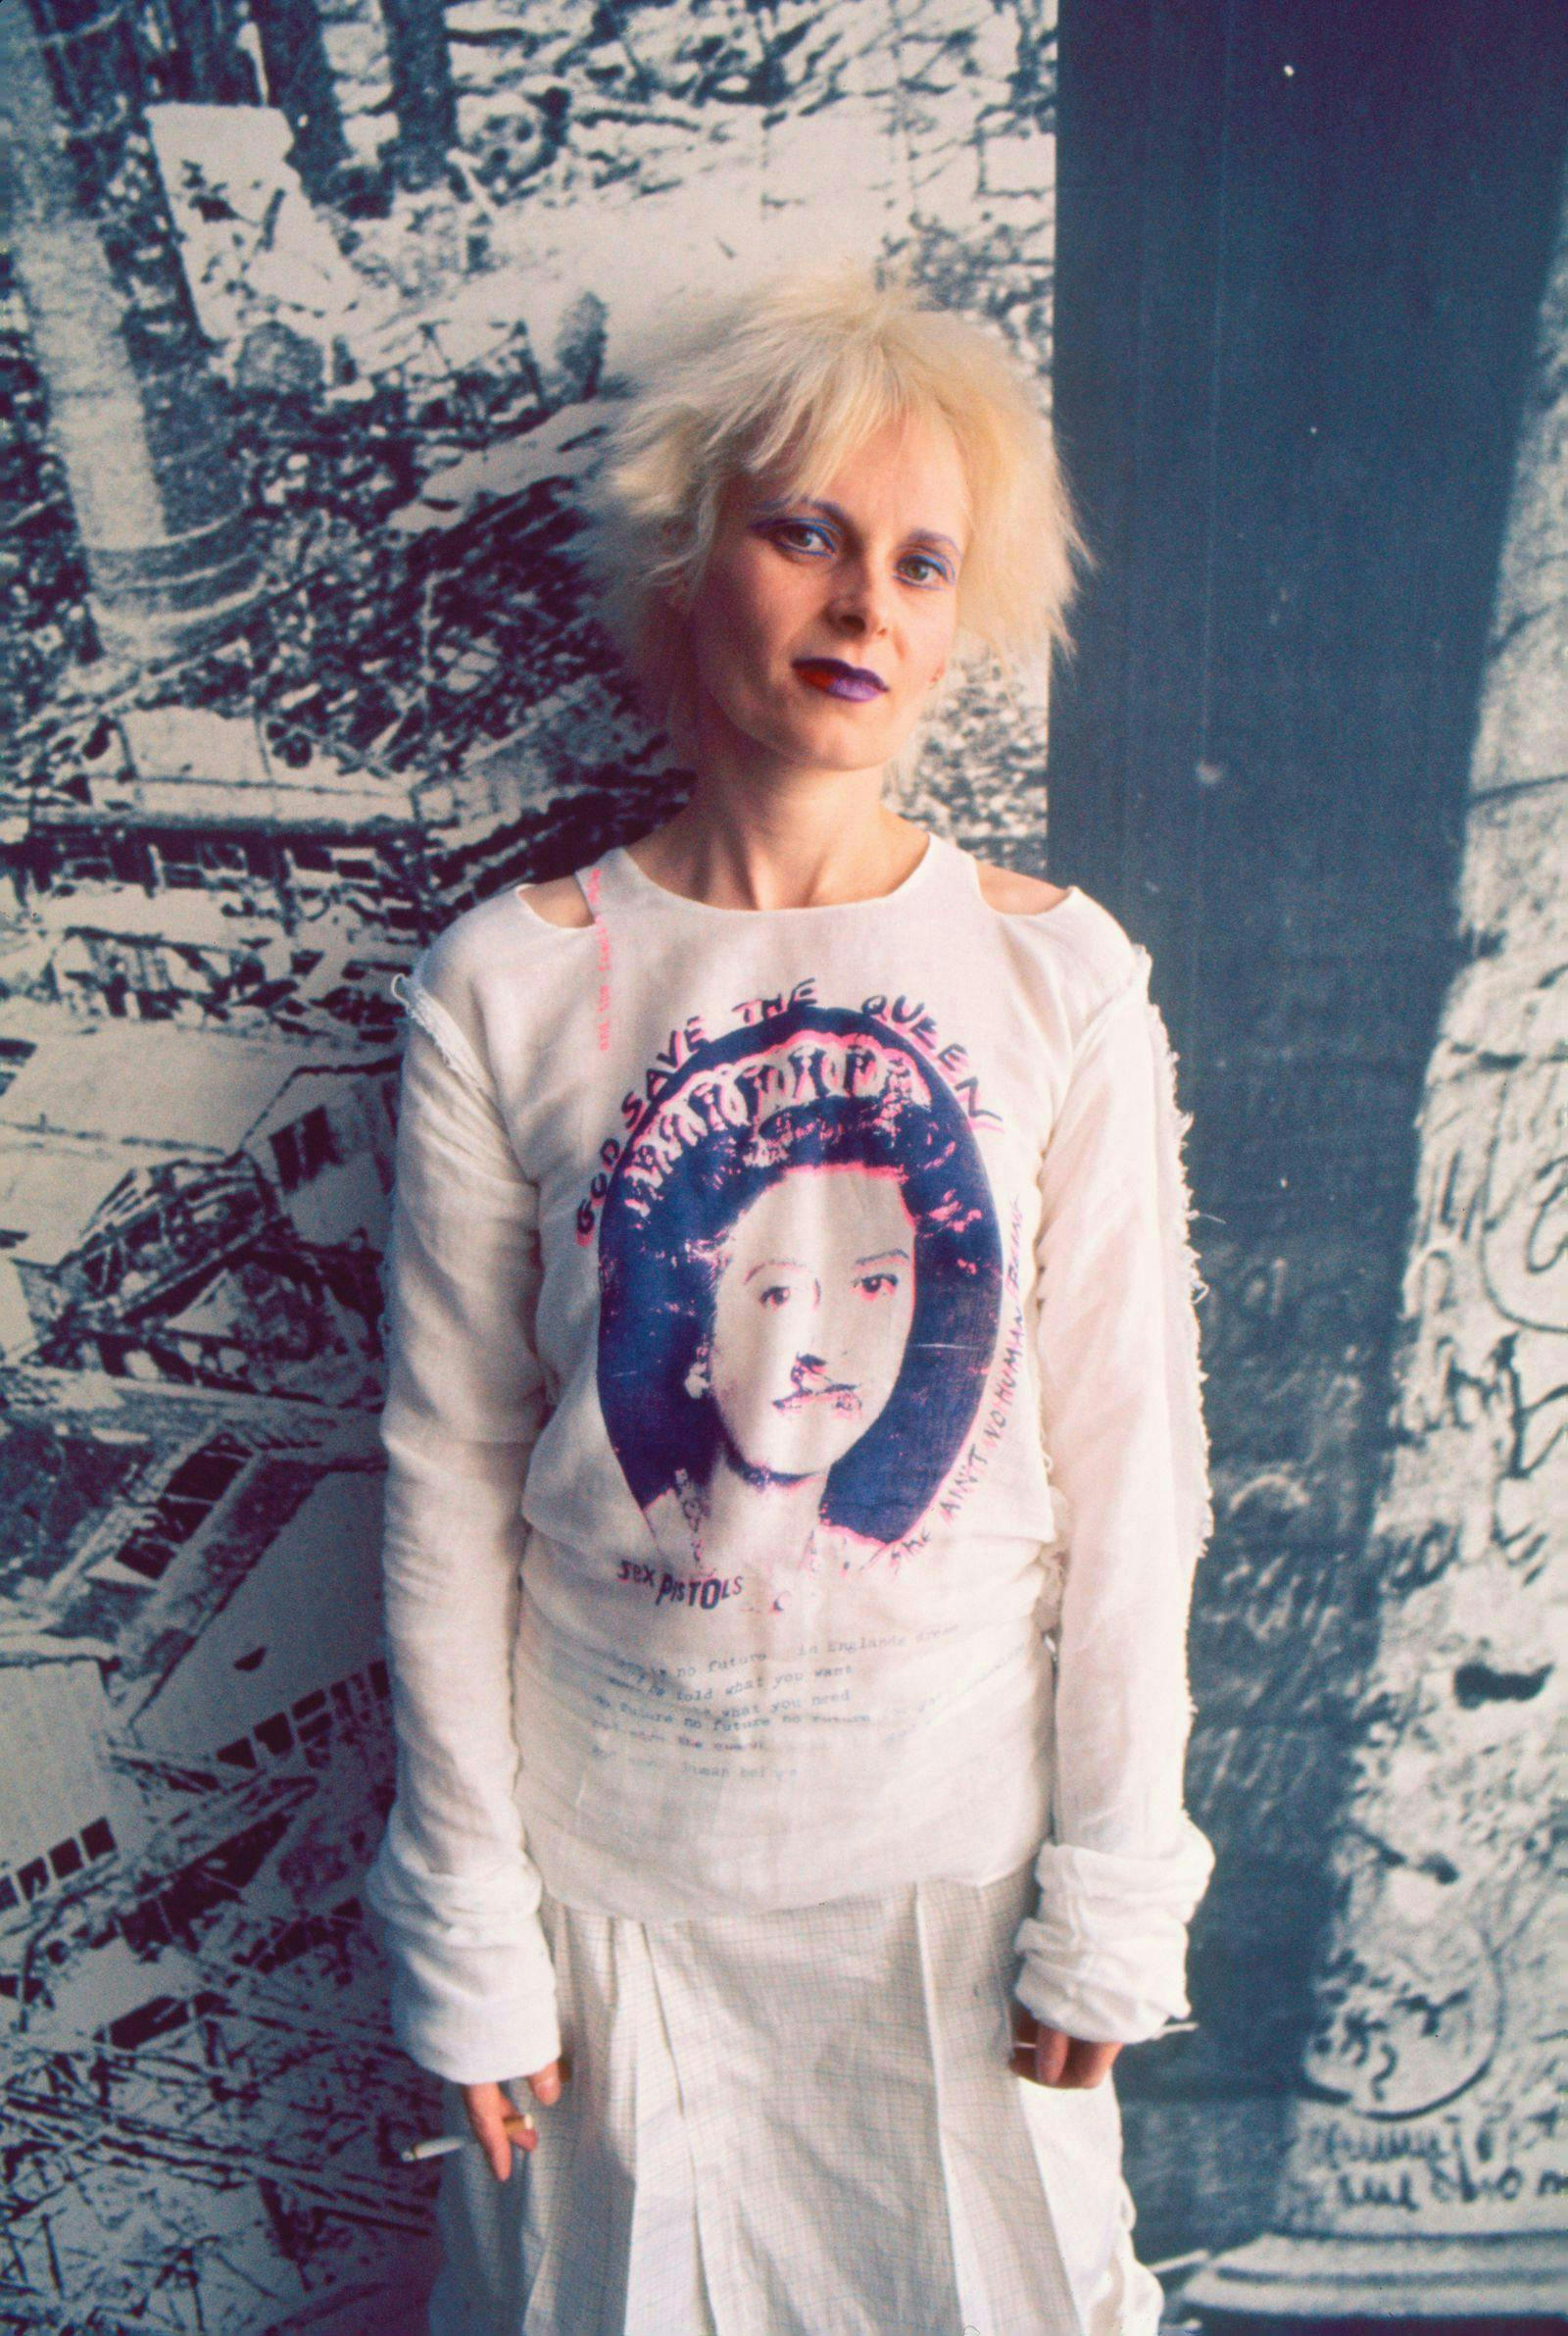 various london uk 1977 vivienne westwood 15 punk fashion designer with malcolm mclaren manager sex pistols at her boutique seditionaries clothes for heroes 430 kings road dame god save queen slogan elizabeth ii motif top fashion designer alone female posed personality 82266417 long sleeve sleeve t-shirt portrait person blonde lady blouse woman adult